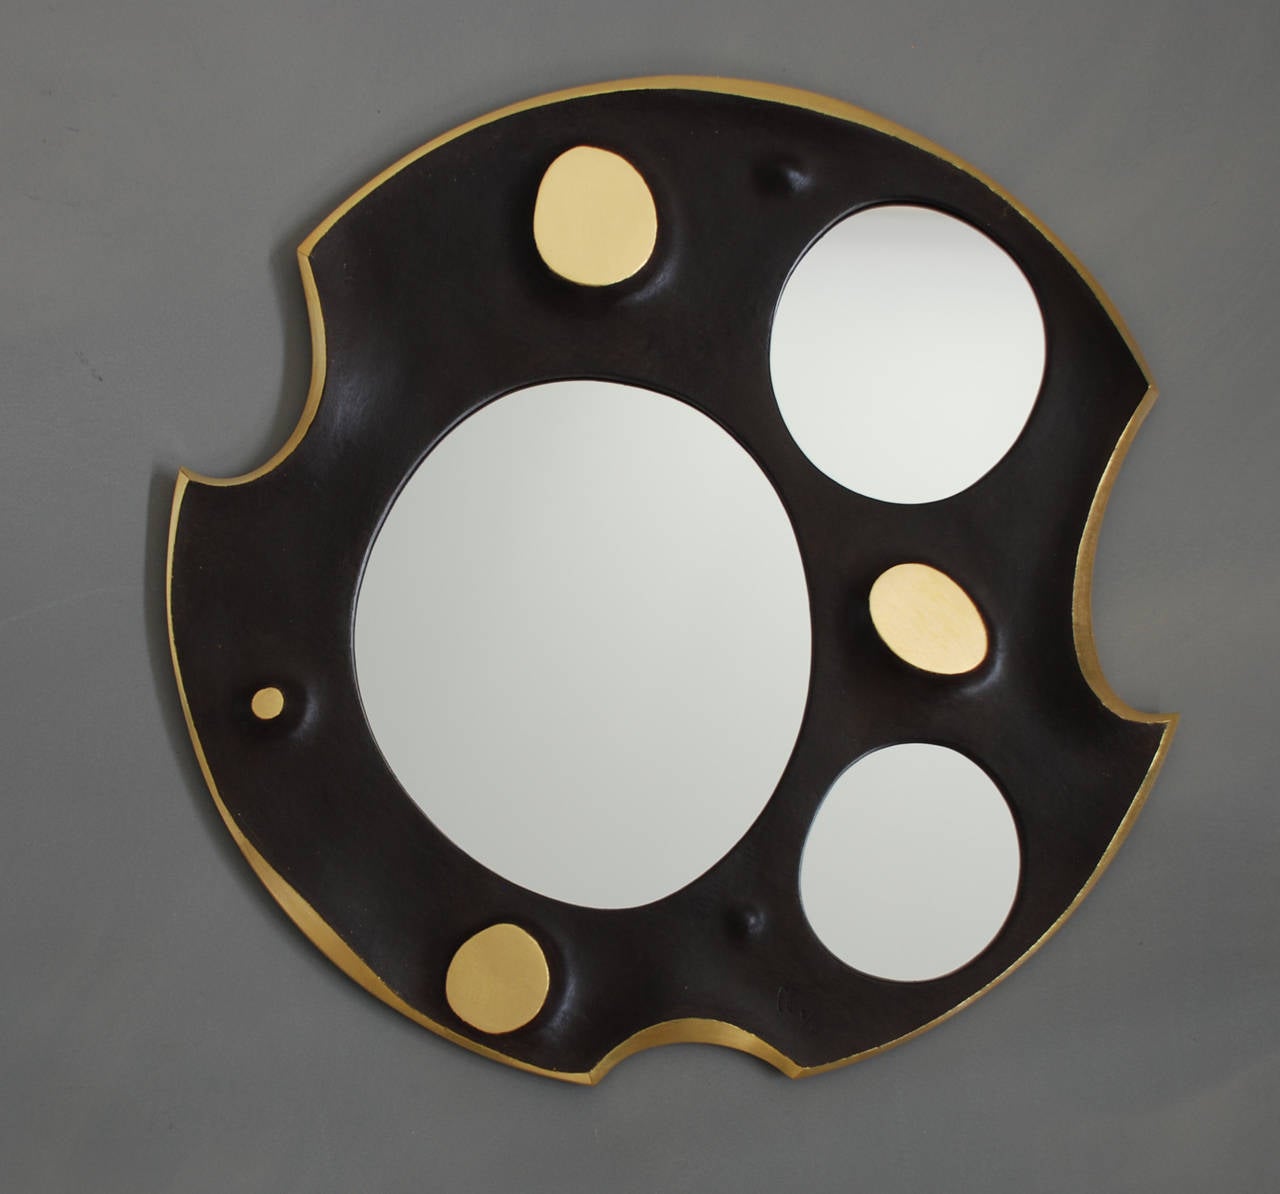 Hand-Crafted Volcan Mirrors by Franck Evennou